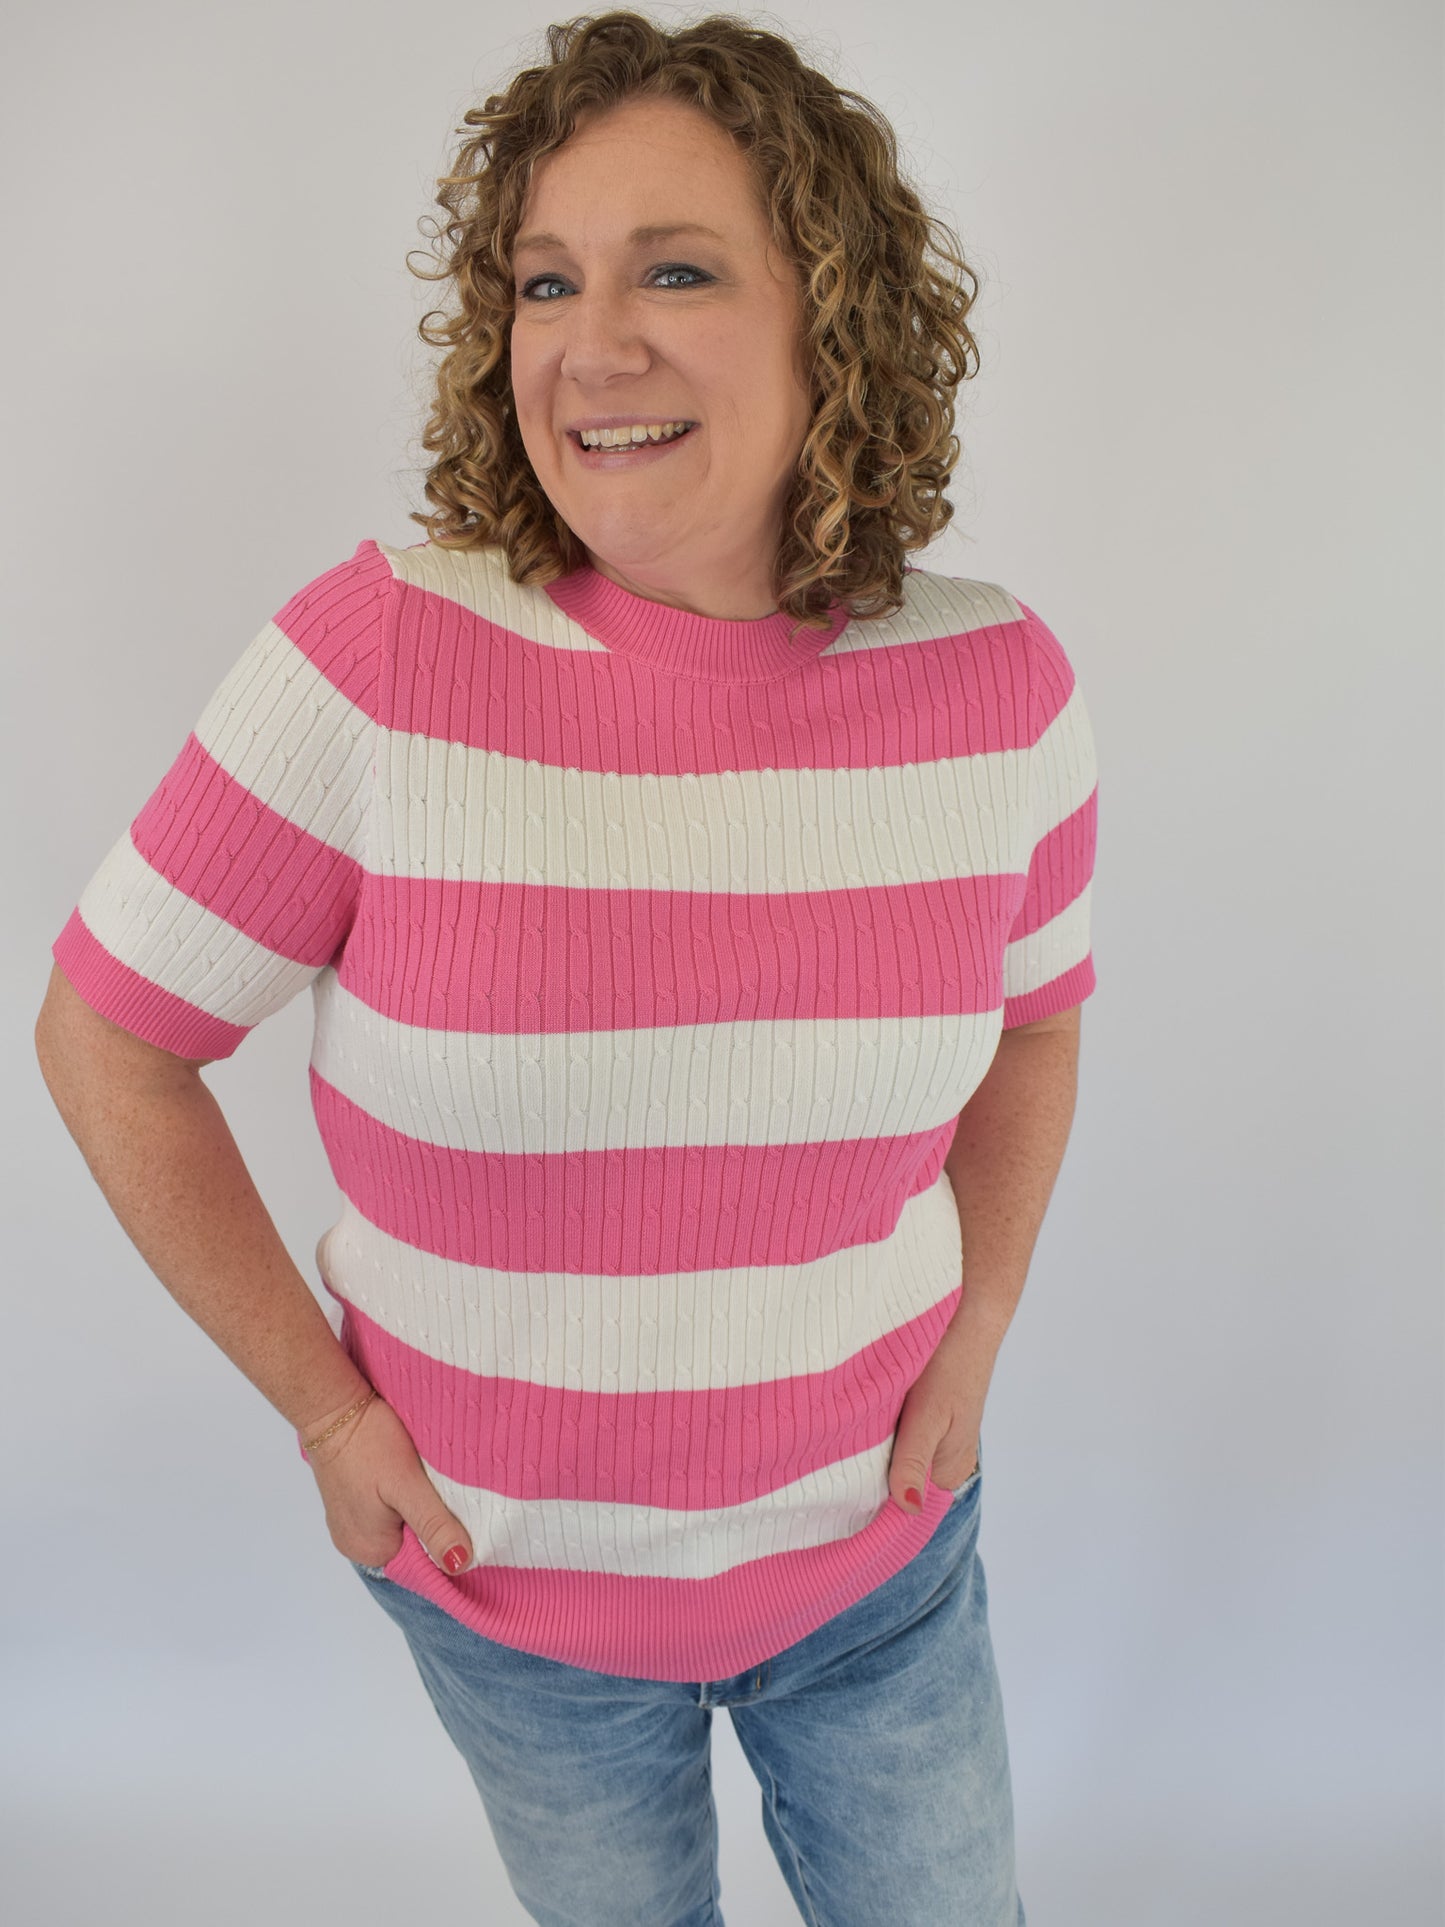 One Last Chance Striped Knit Sweater Top